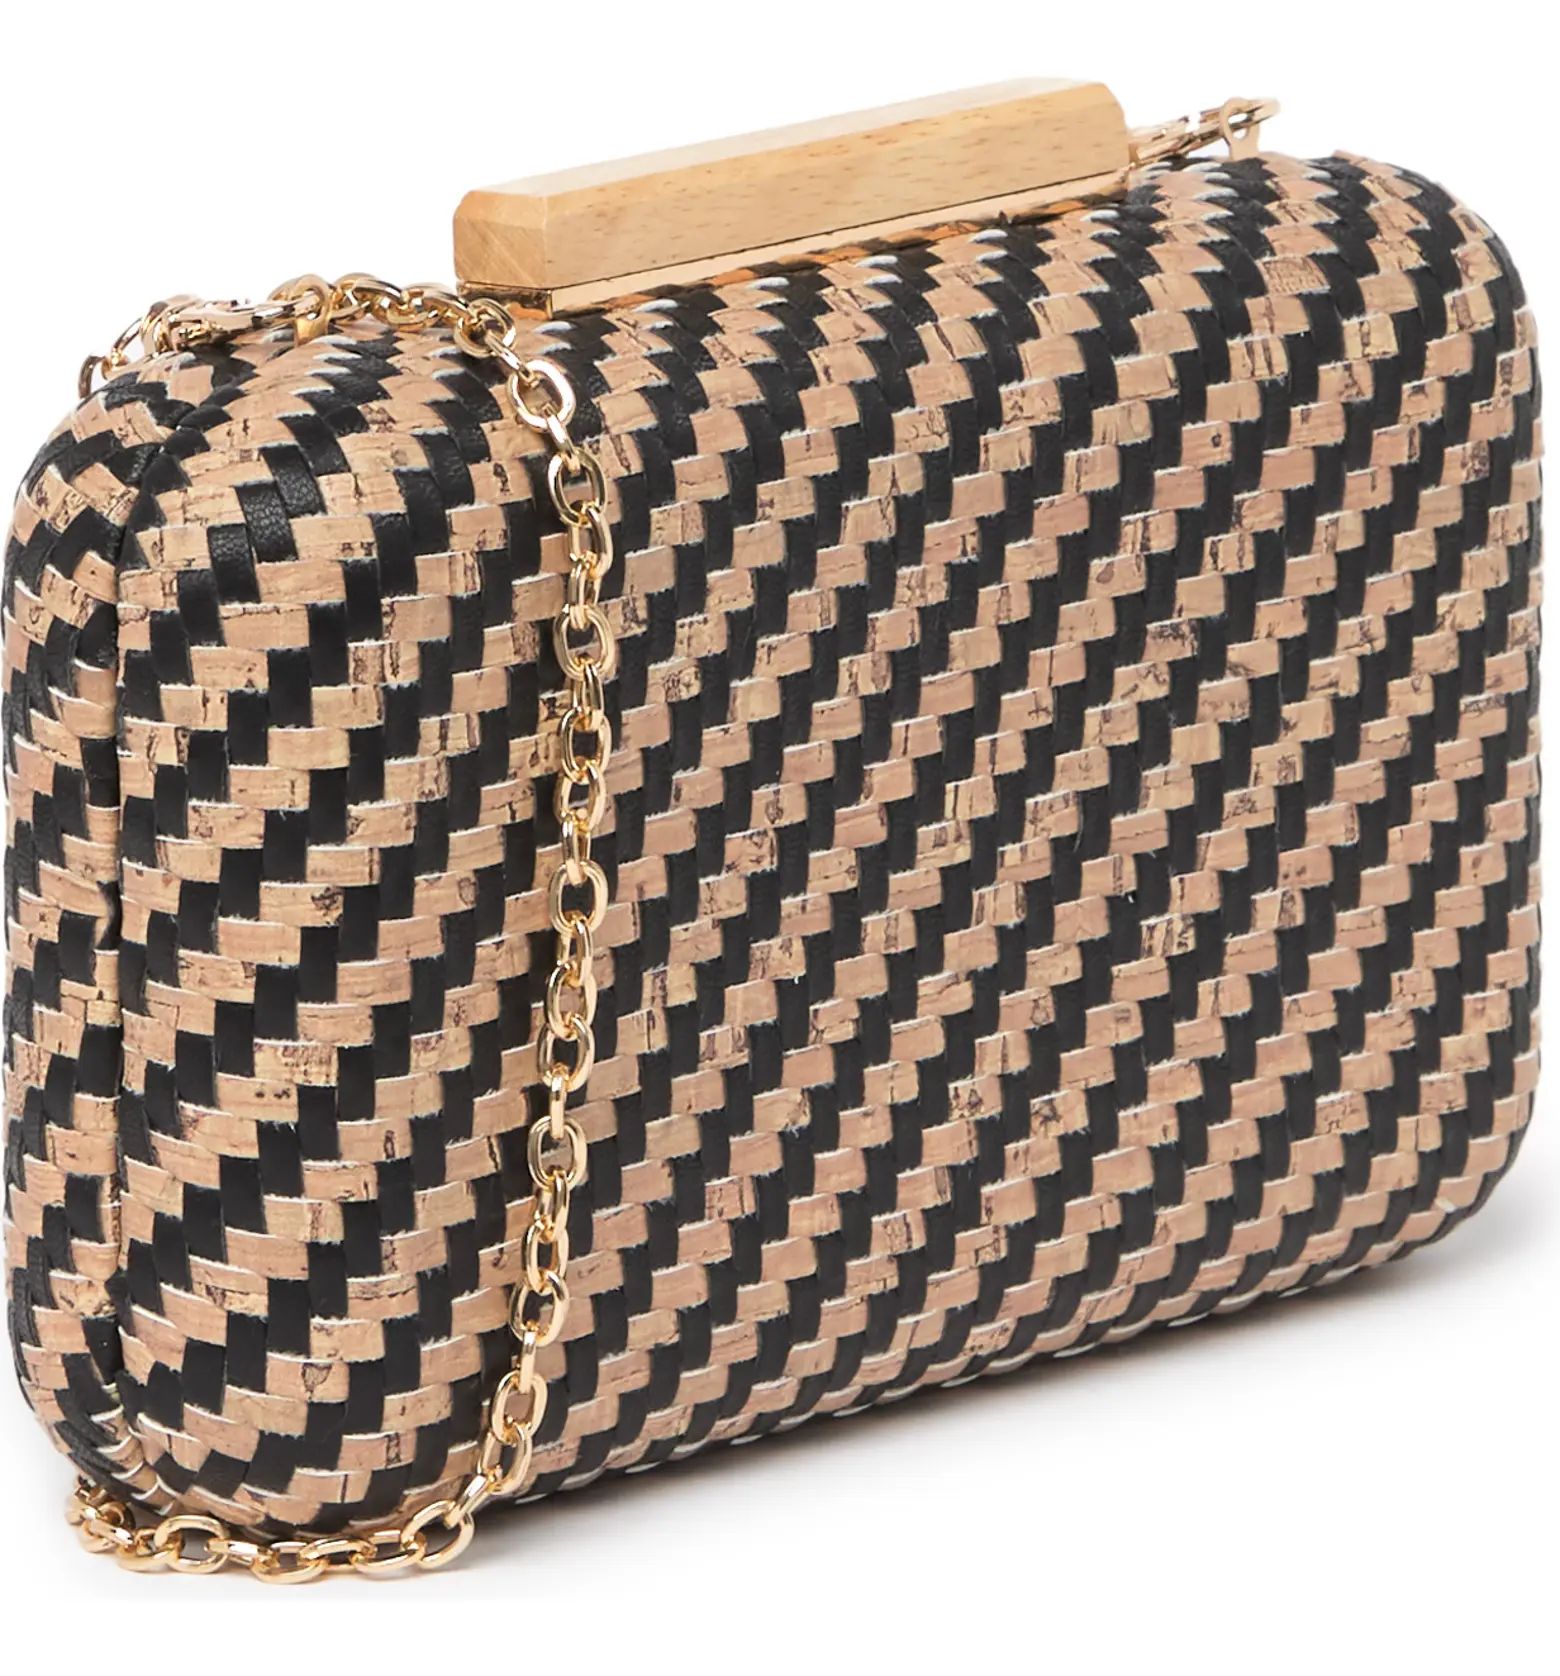 URBAN EXPRESSIONS HANDBAGS URBAN EXPRESSIONS Two-tone Woven Box Clutch | Nordstromrack | Nordstrom Rack